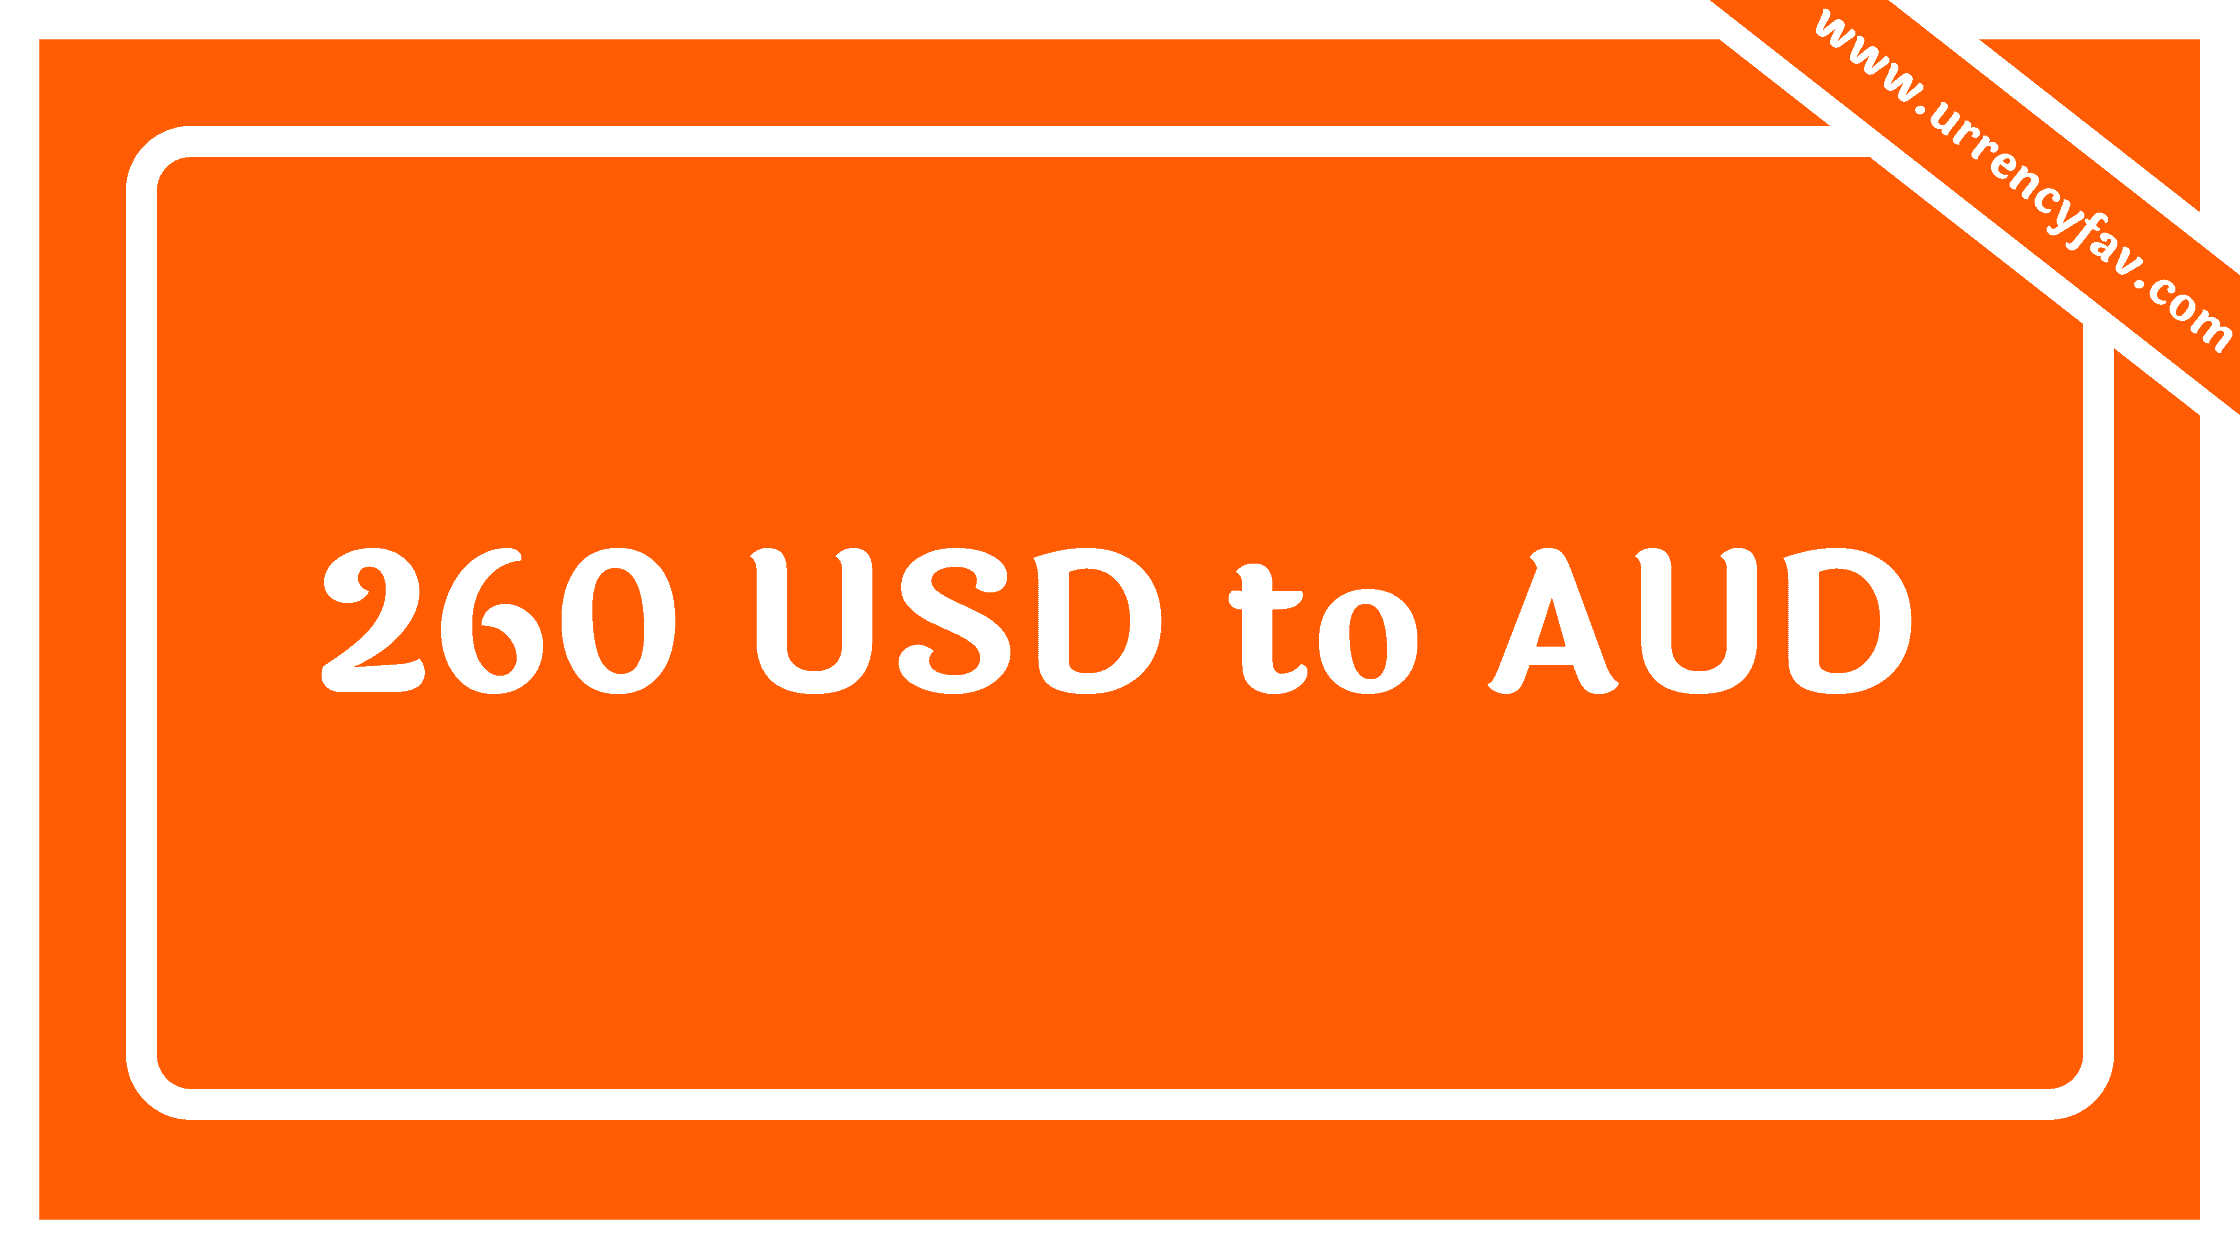 260 USD to AUD